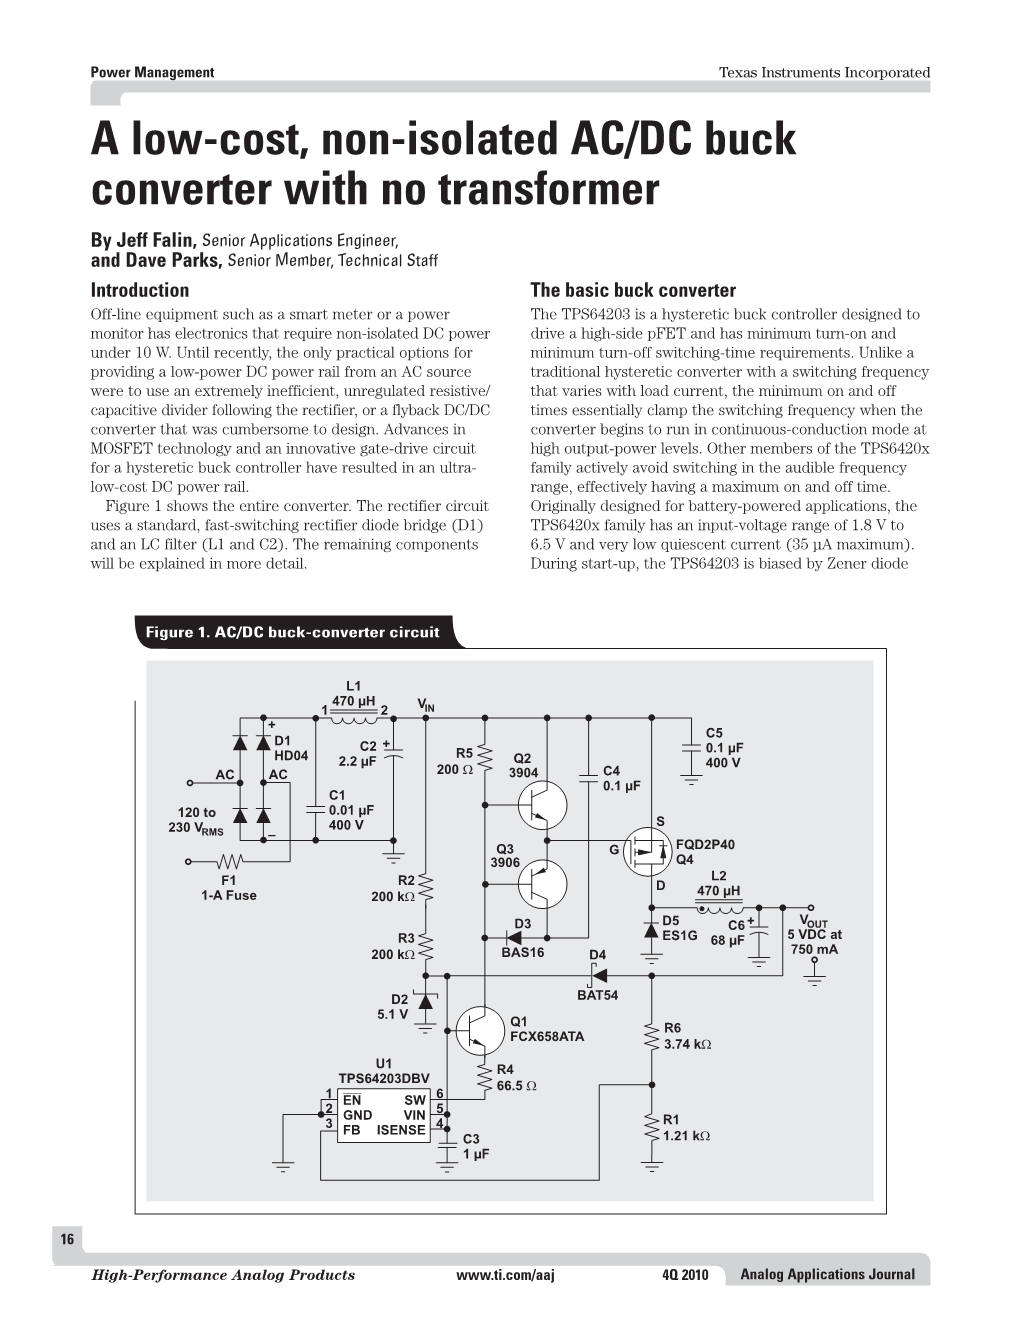 A Low-Cost, Non-Isolated AC/DC Buck Converter with No Transformer